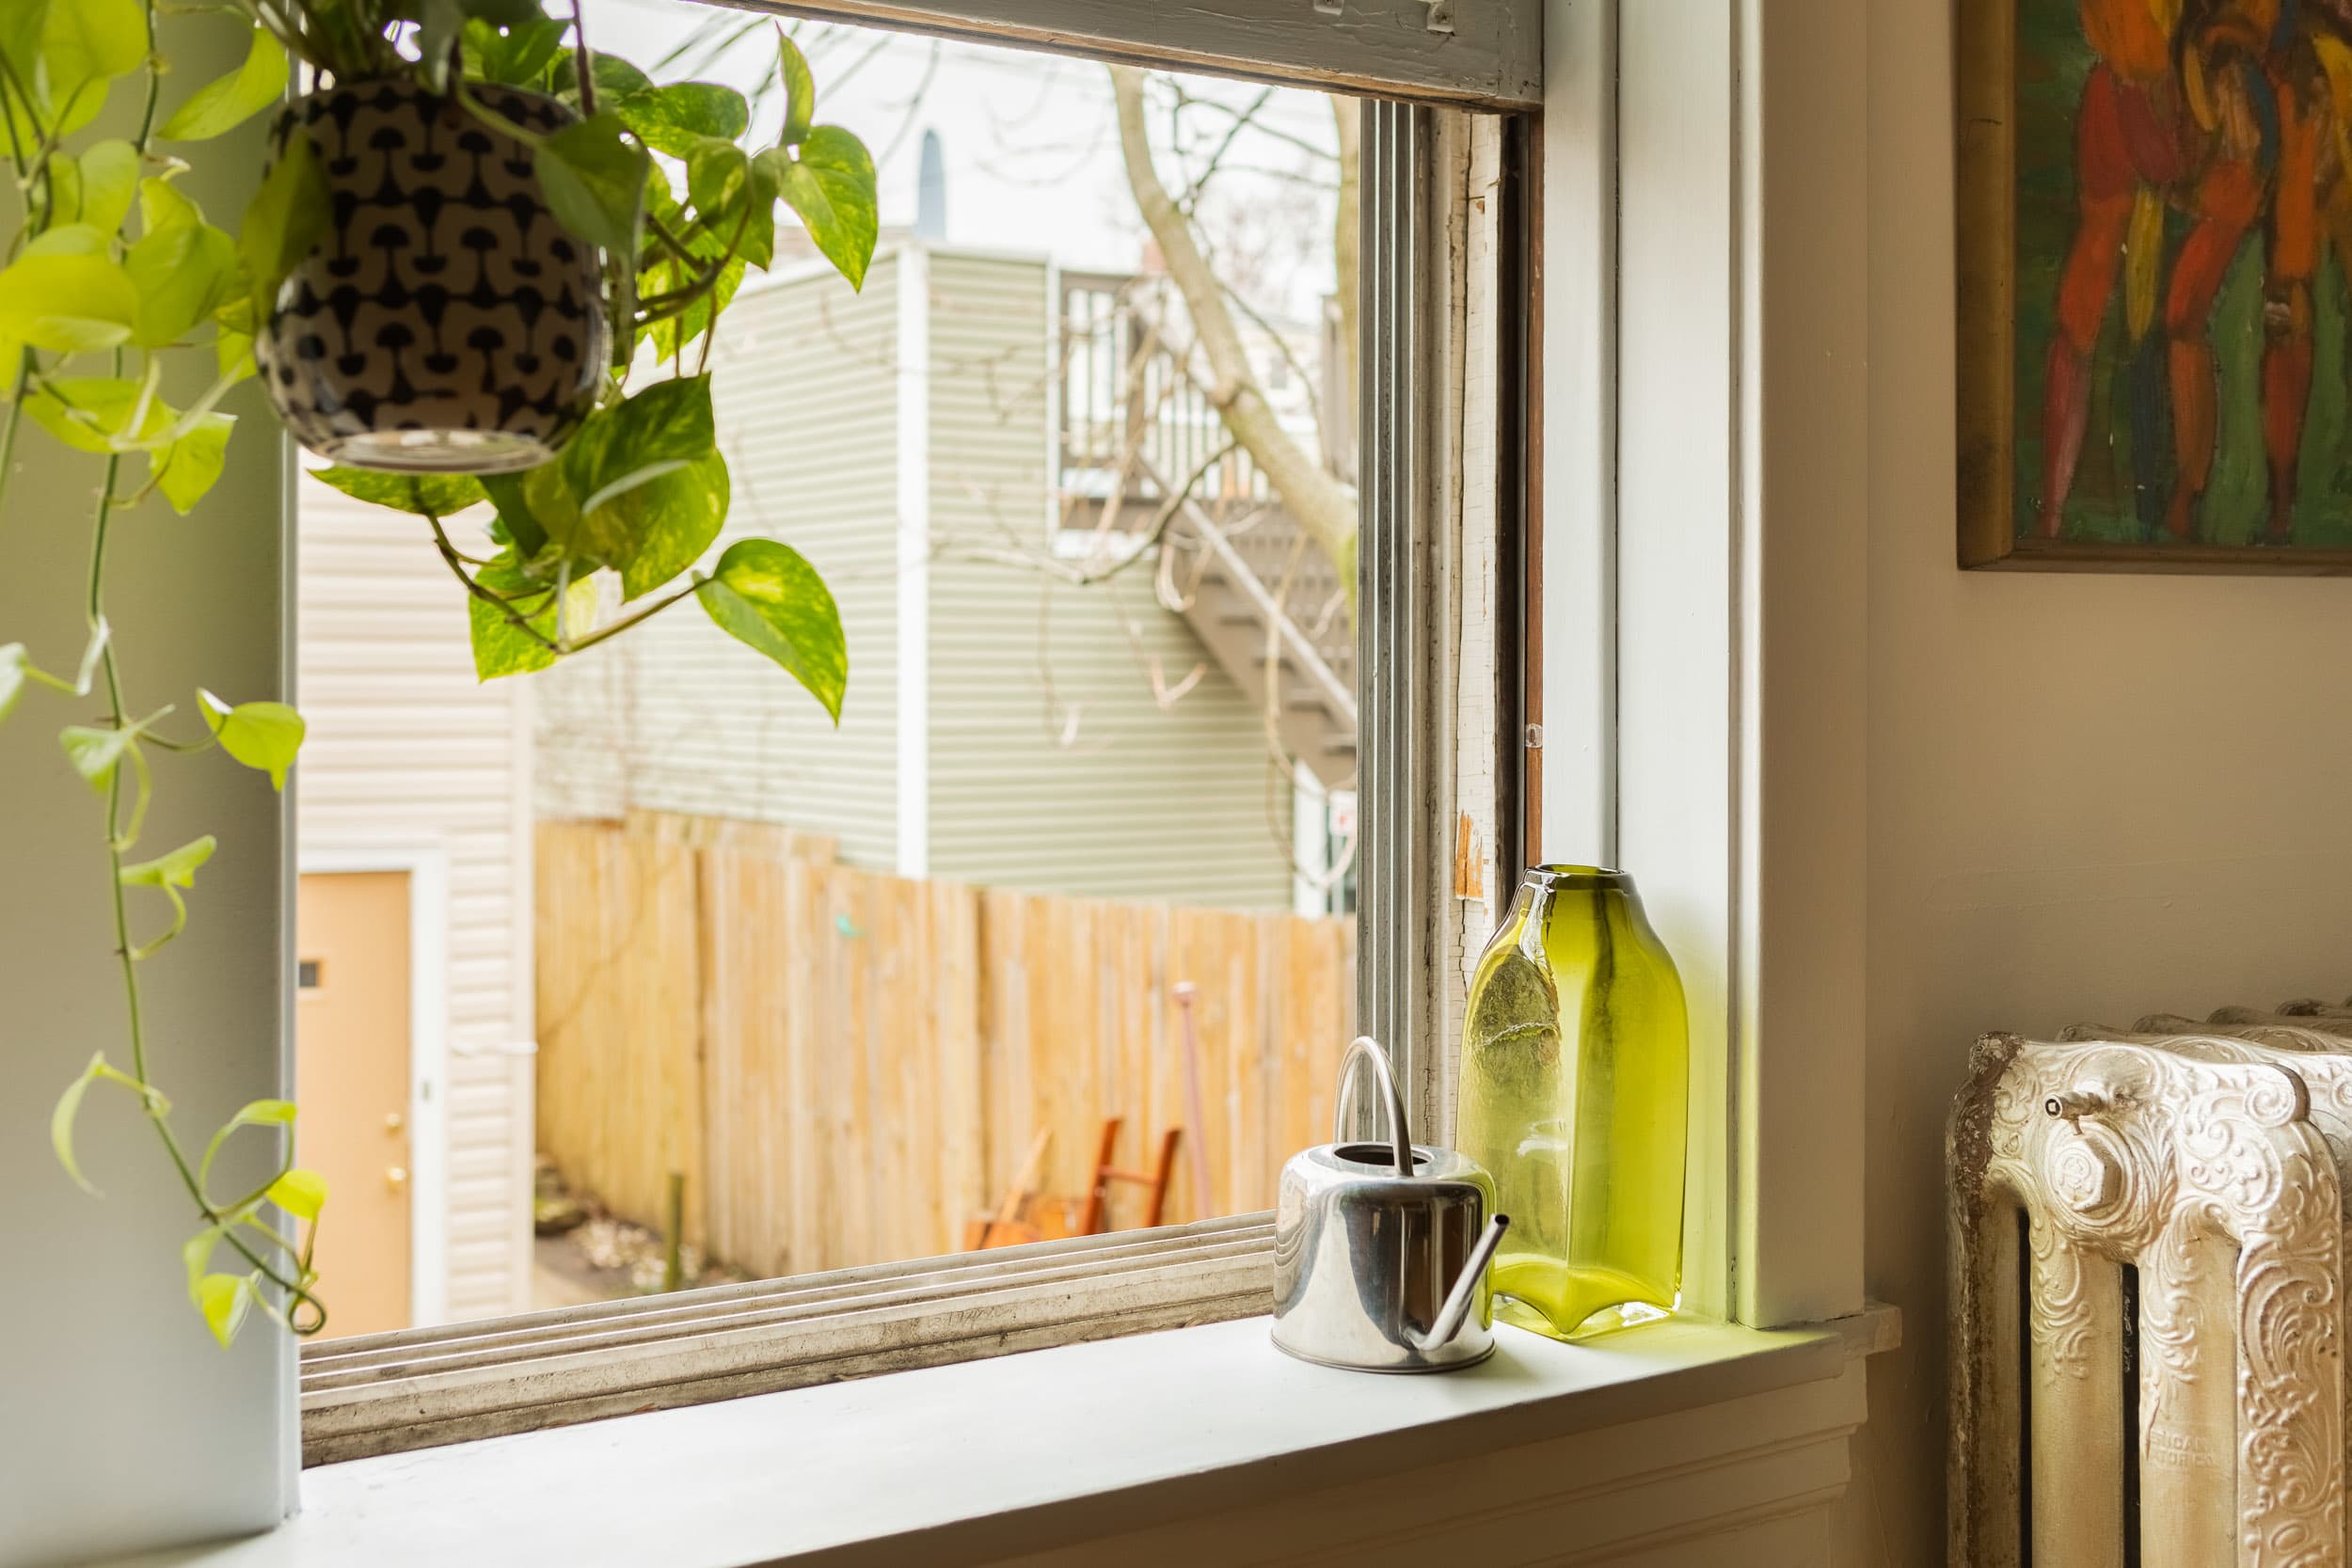 Window Sill Cleaning From Dust Cleaning Your Windows And Window